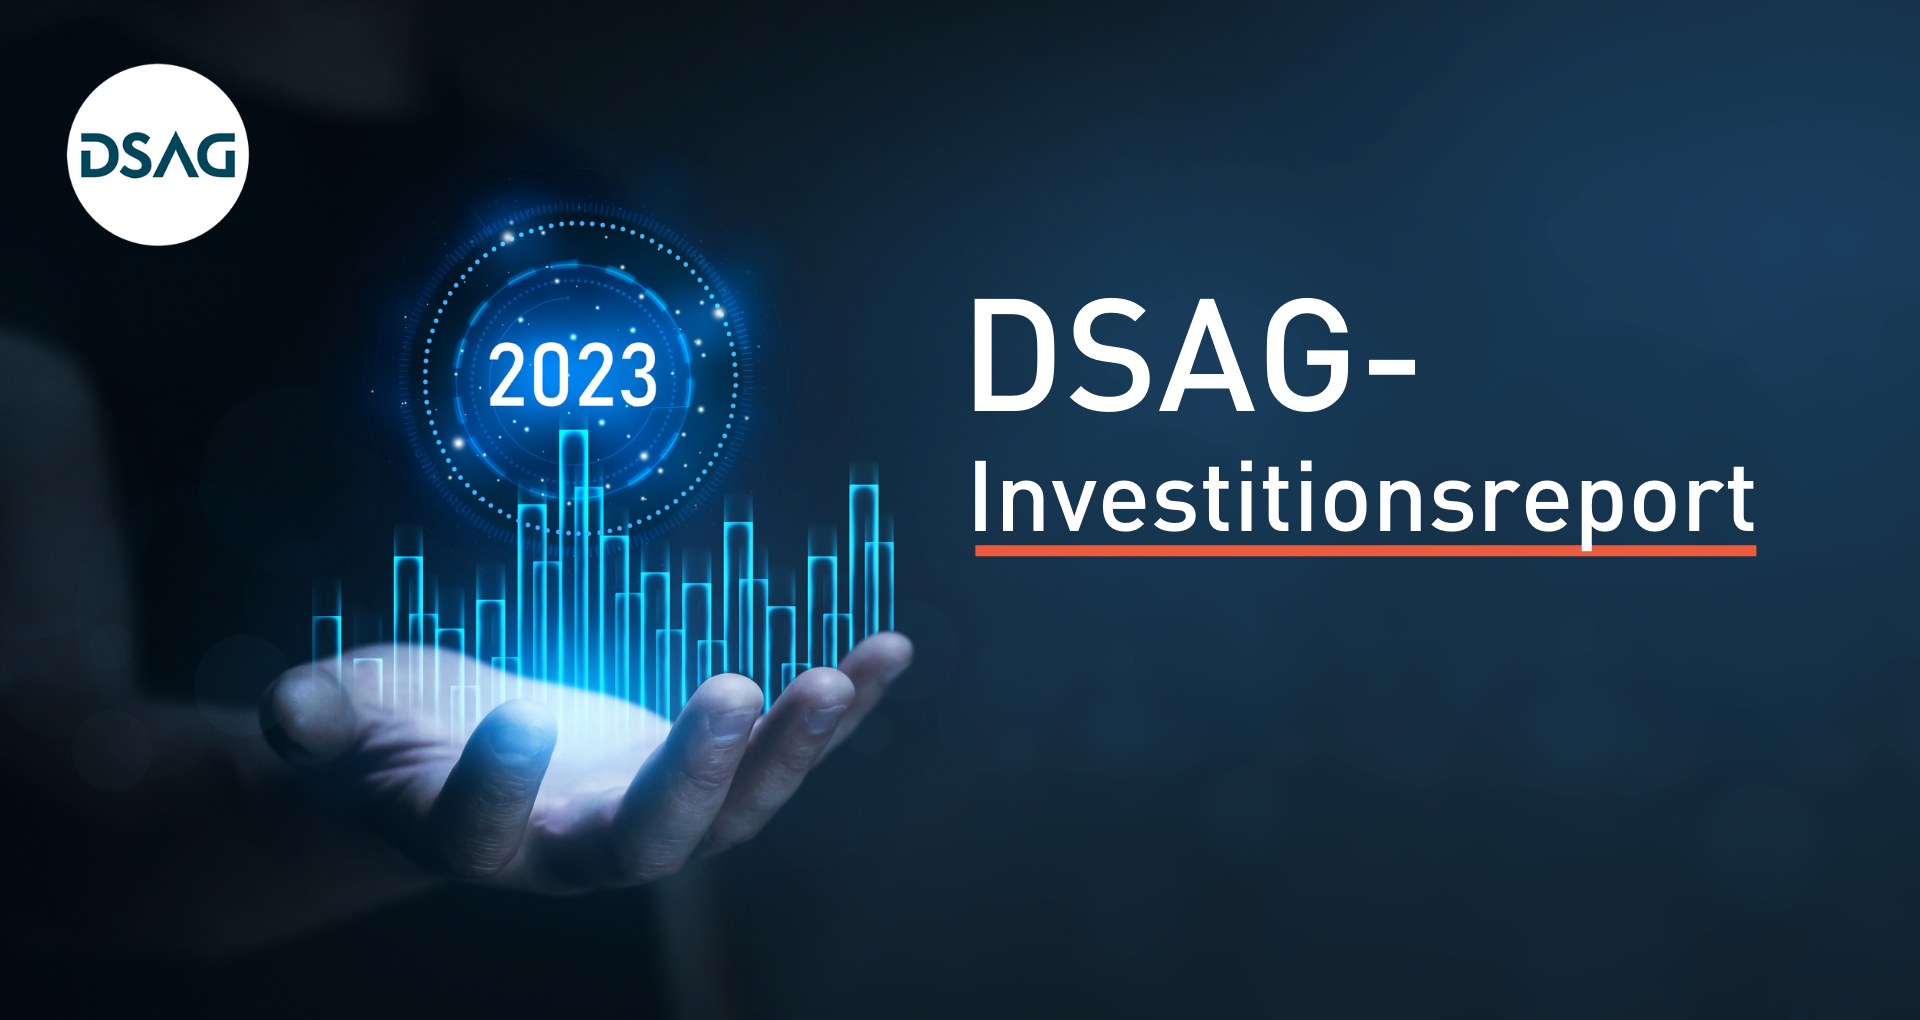 2023 Investitionsreport